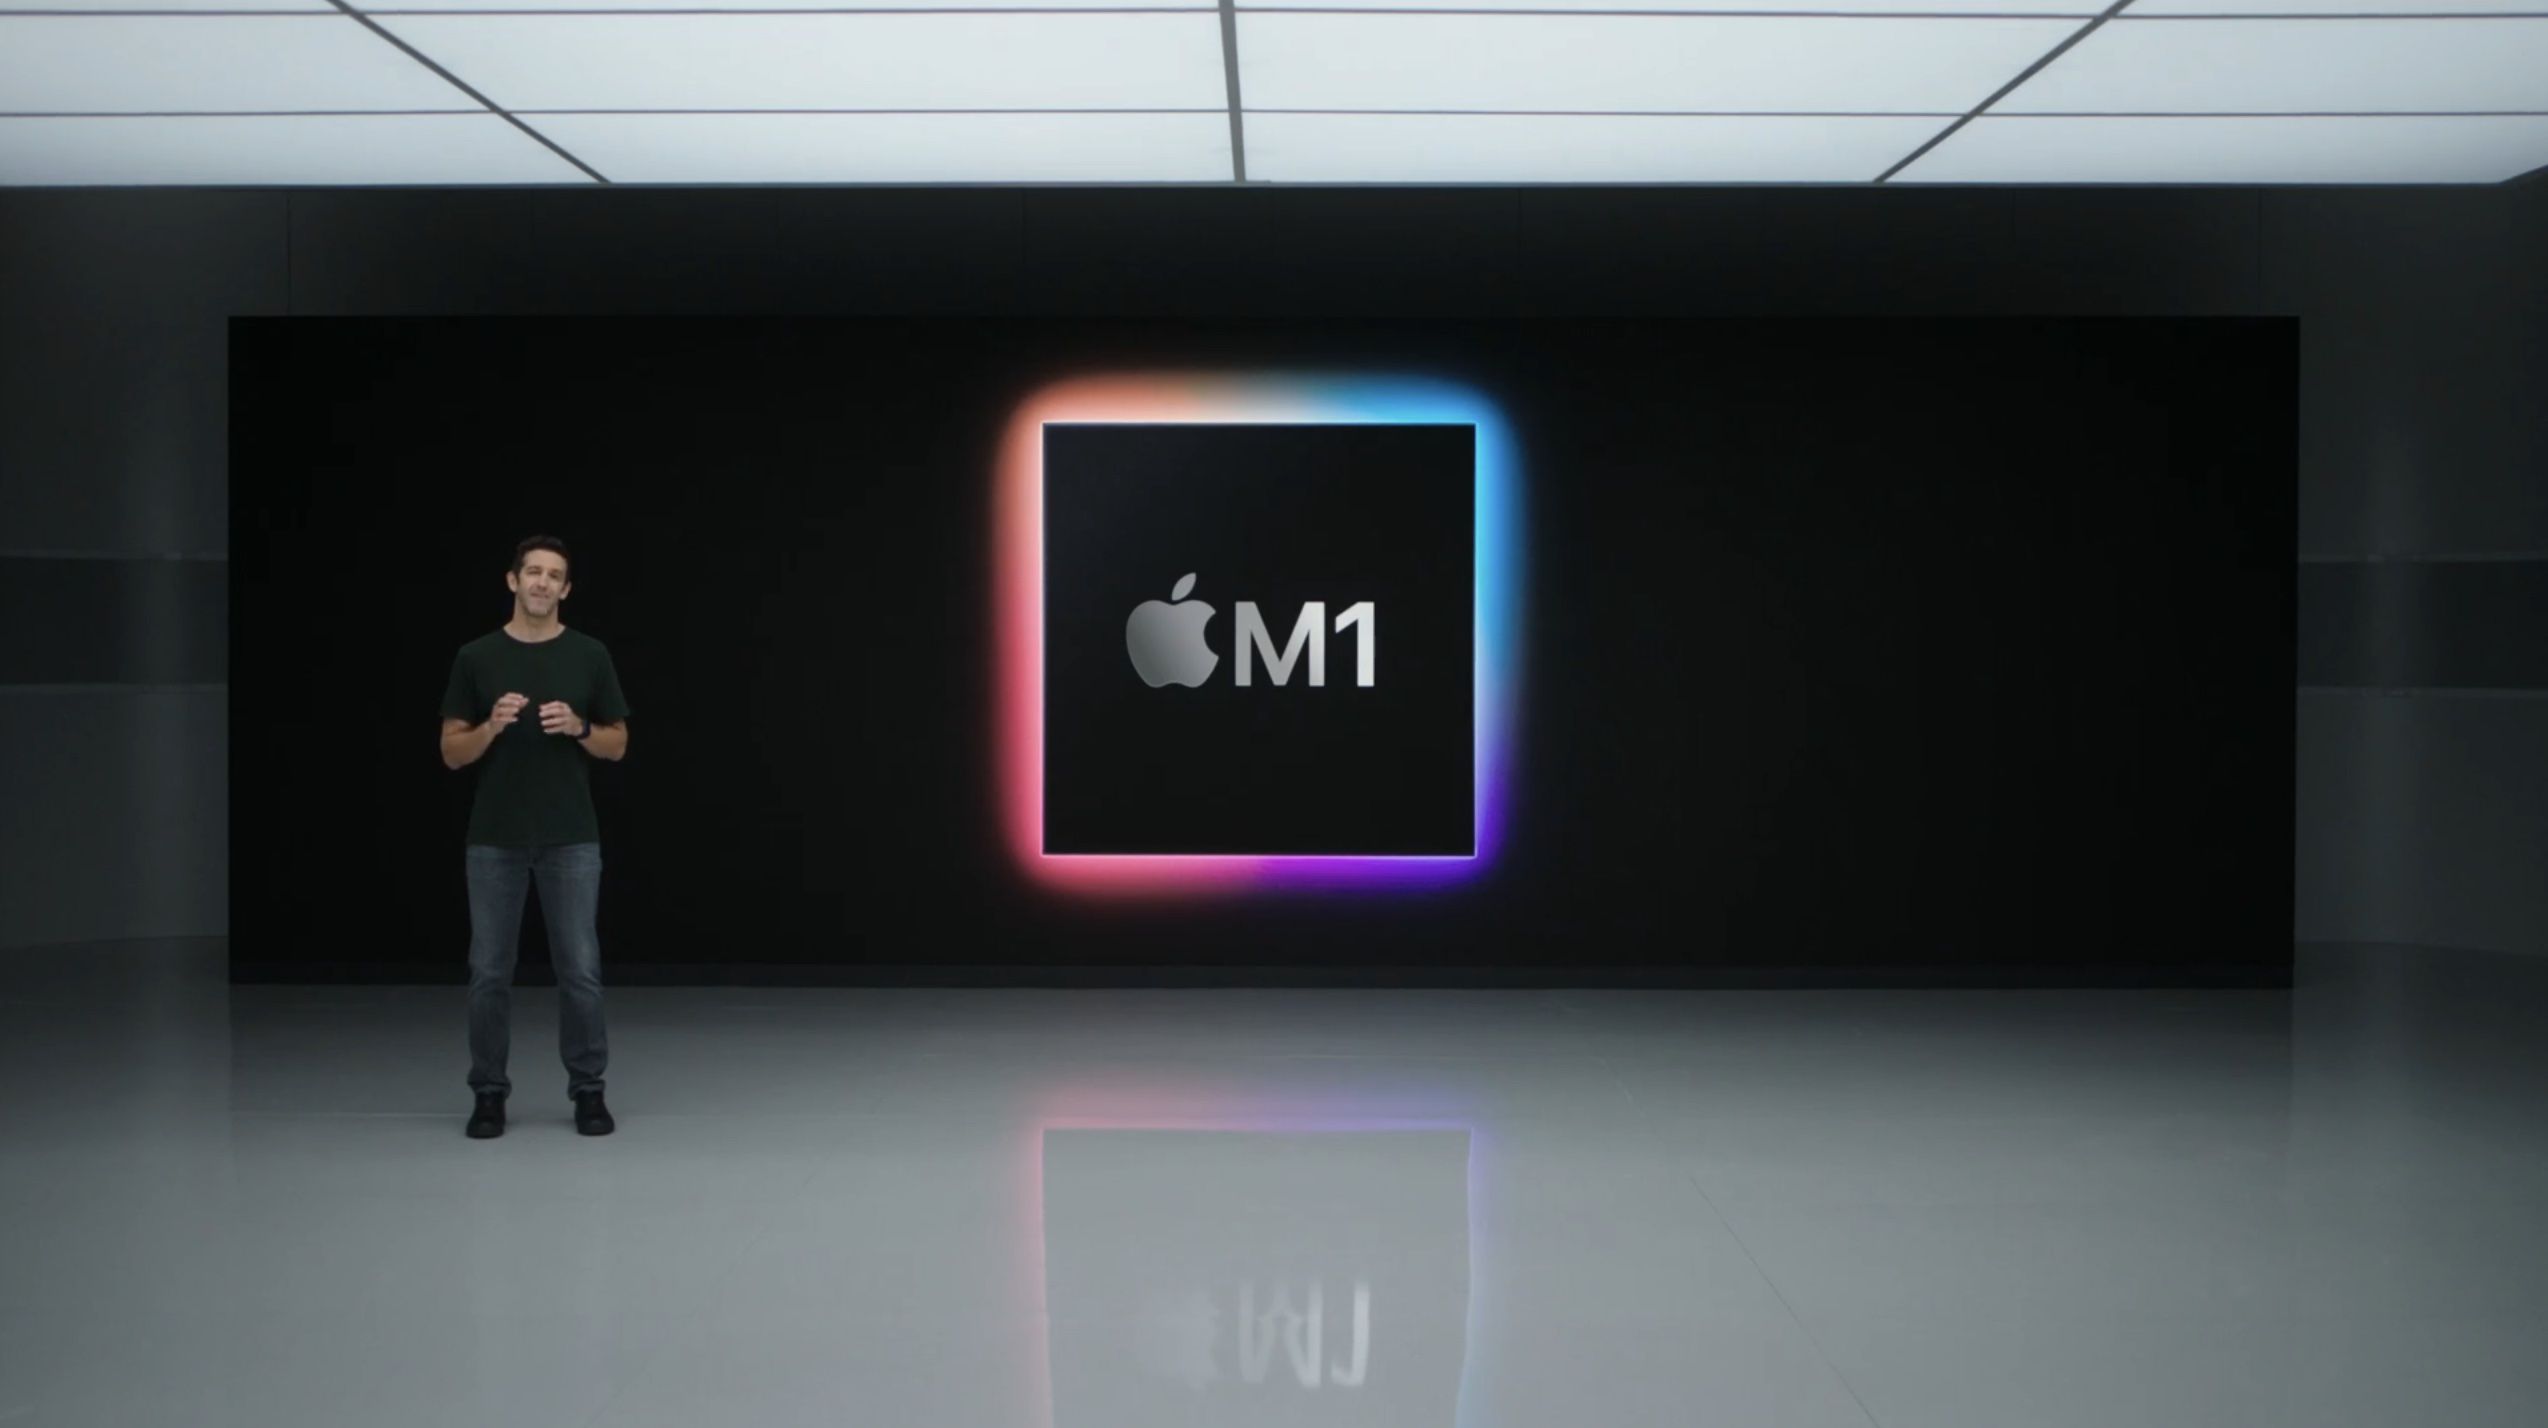 Today Marks the One Year Anniversary of the First Apple Silicon Macs